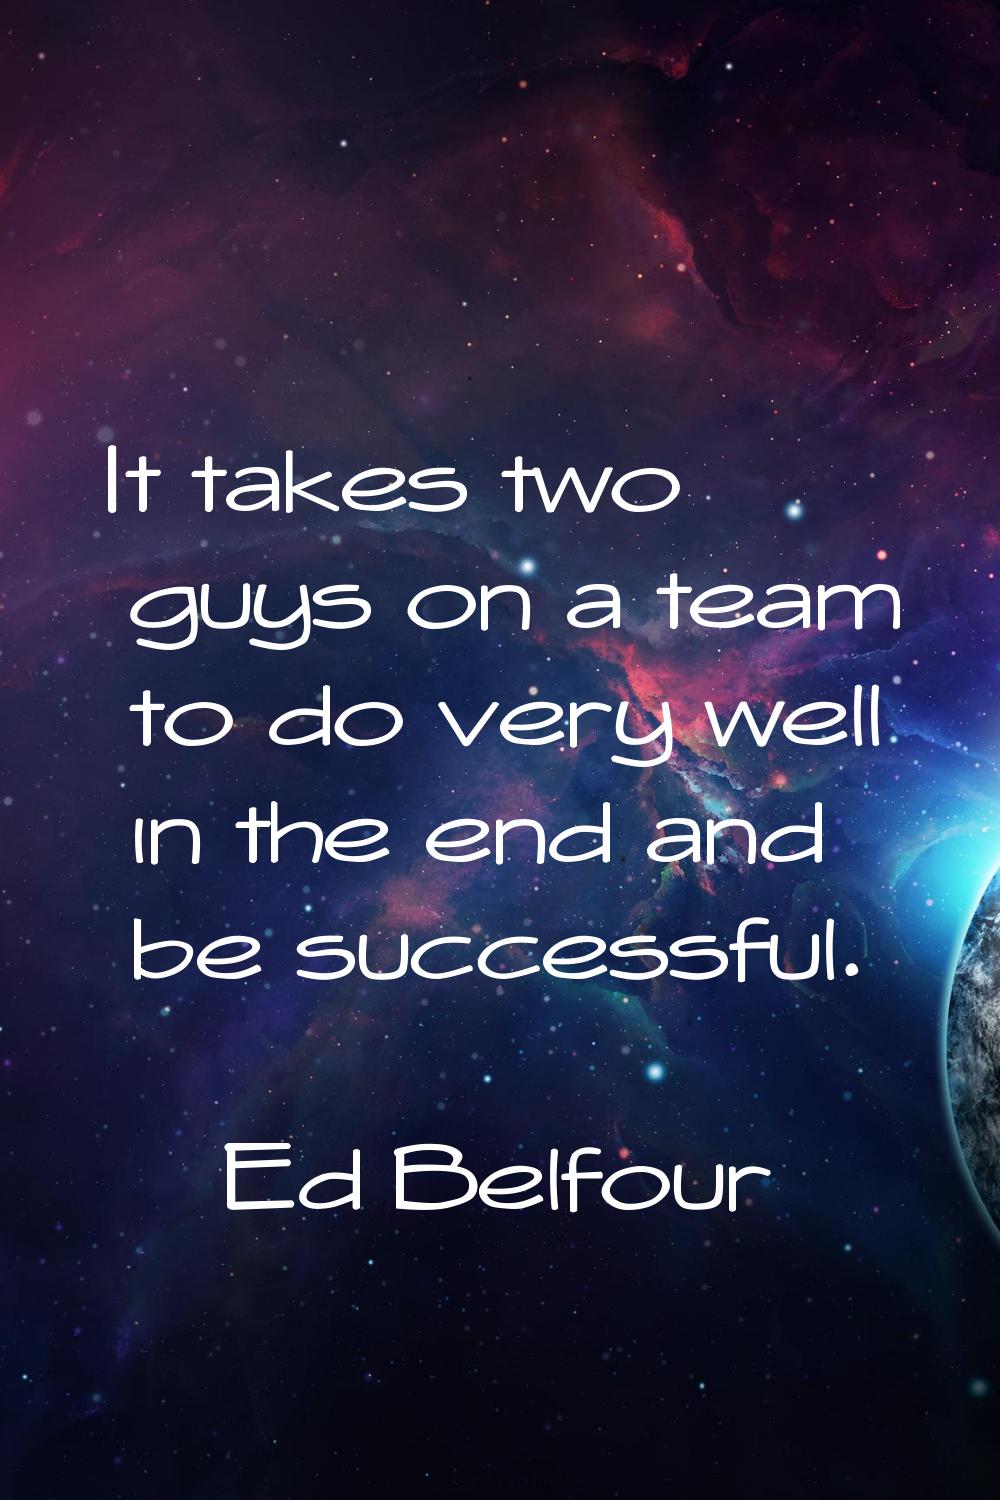 It takes two guys on a team to do very well in the end and be successful.